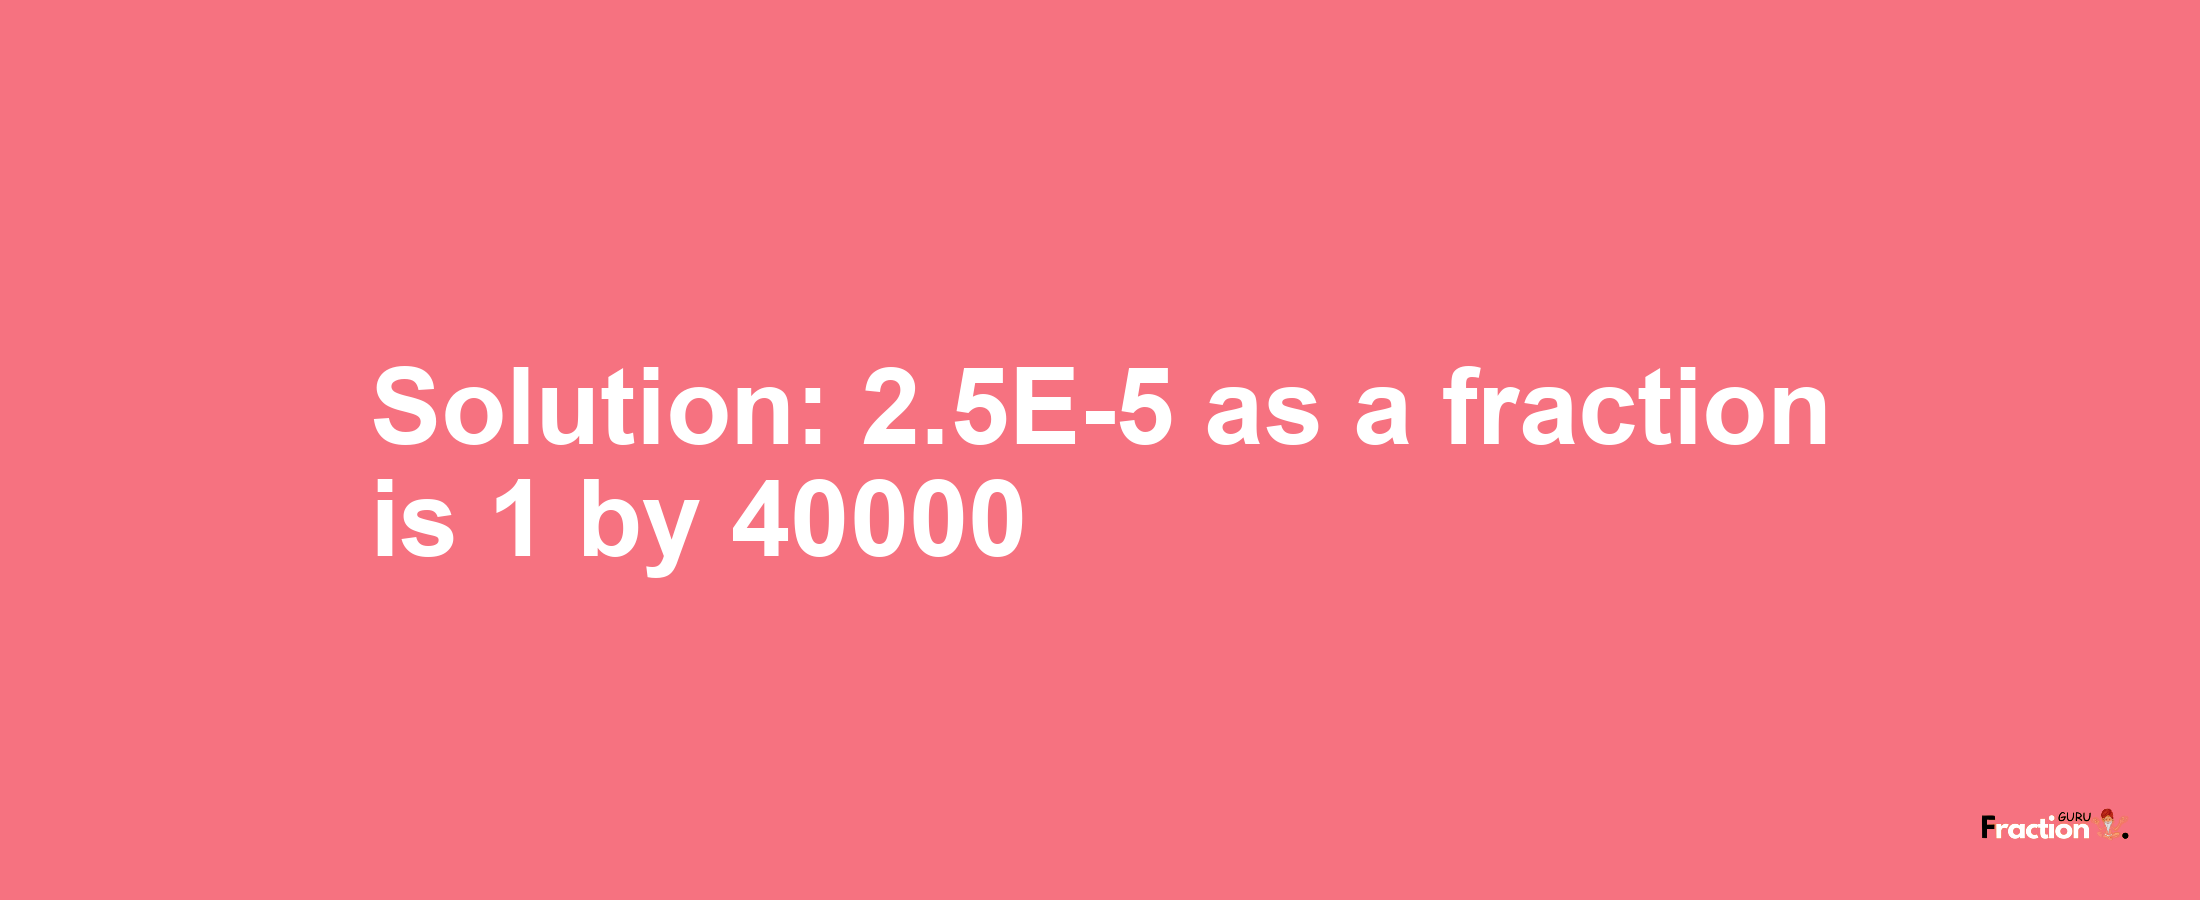 Solution:2.5E-5 as a fraction is 1/40000